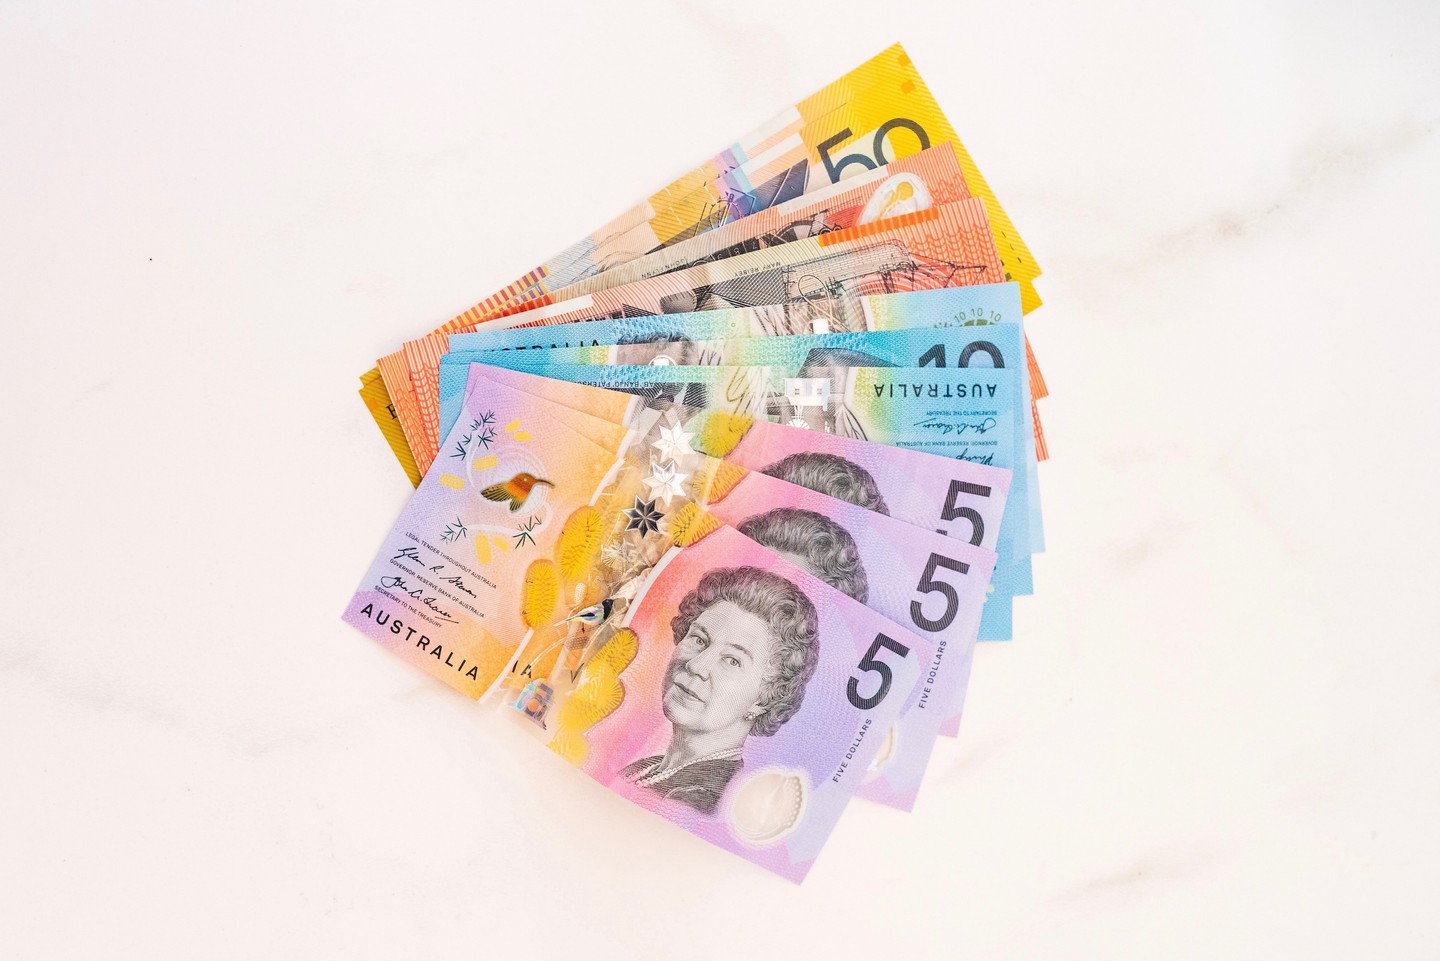 Australian dollars fanned out on marble background